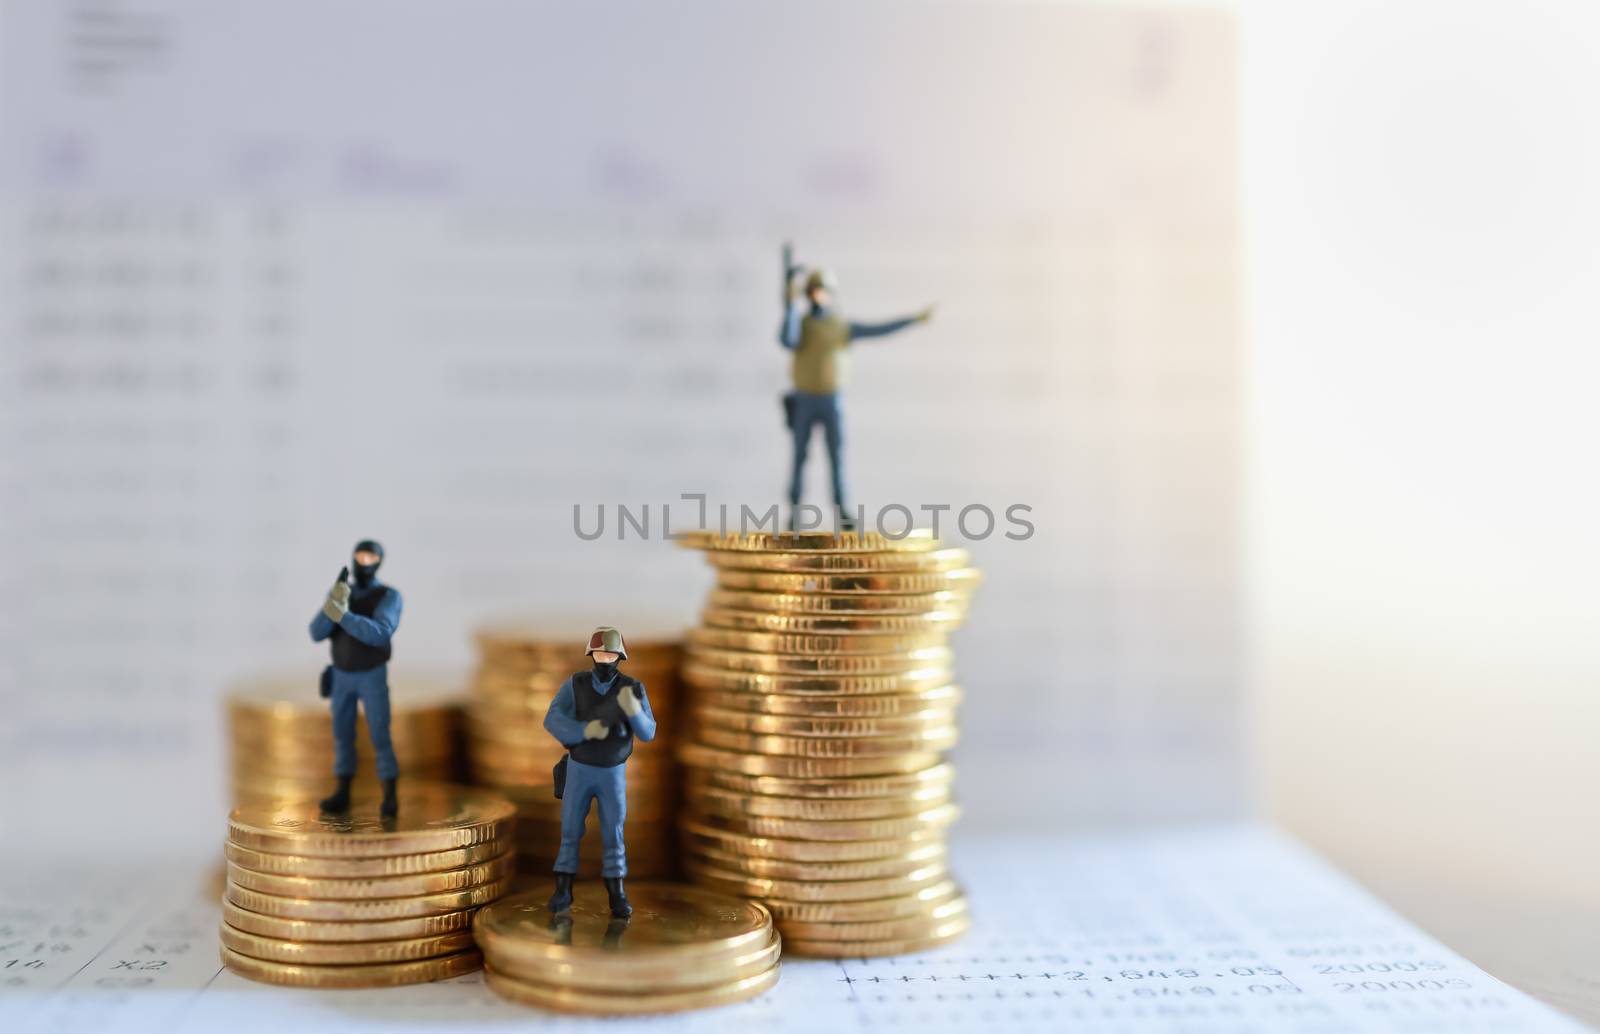 Business, Money and Security Concept. Close up of group of soldier or police miniature figure people standing and guard and protect on top stack of gold coins on bank passbook with copy space.